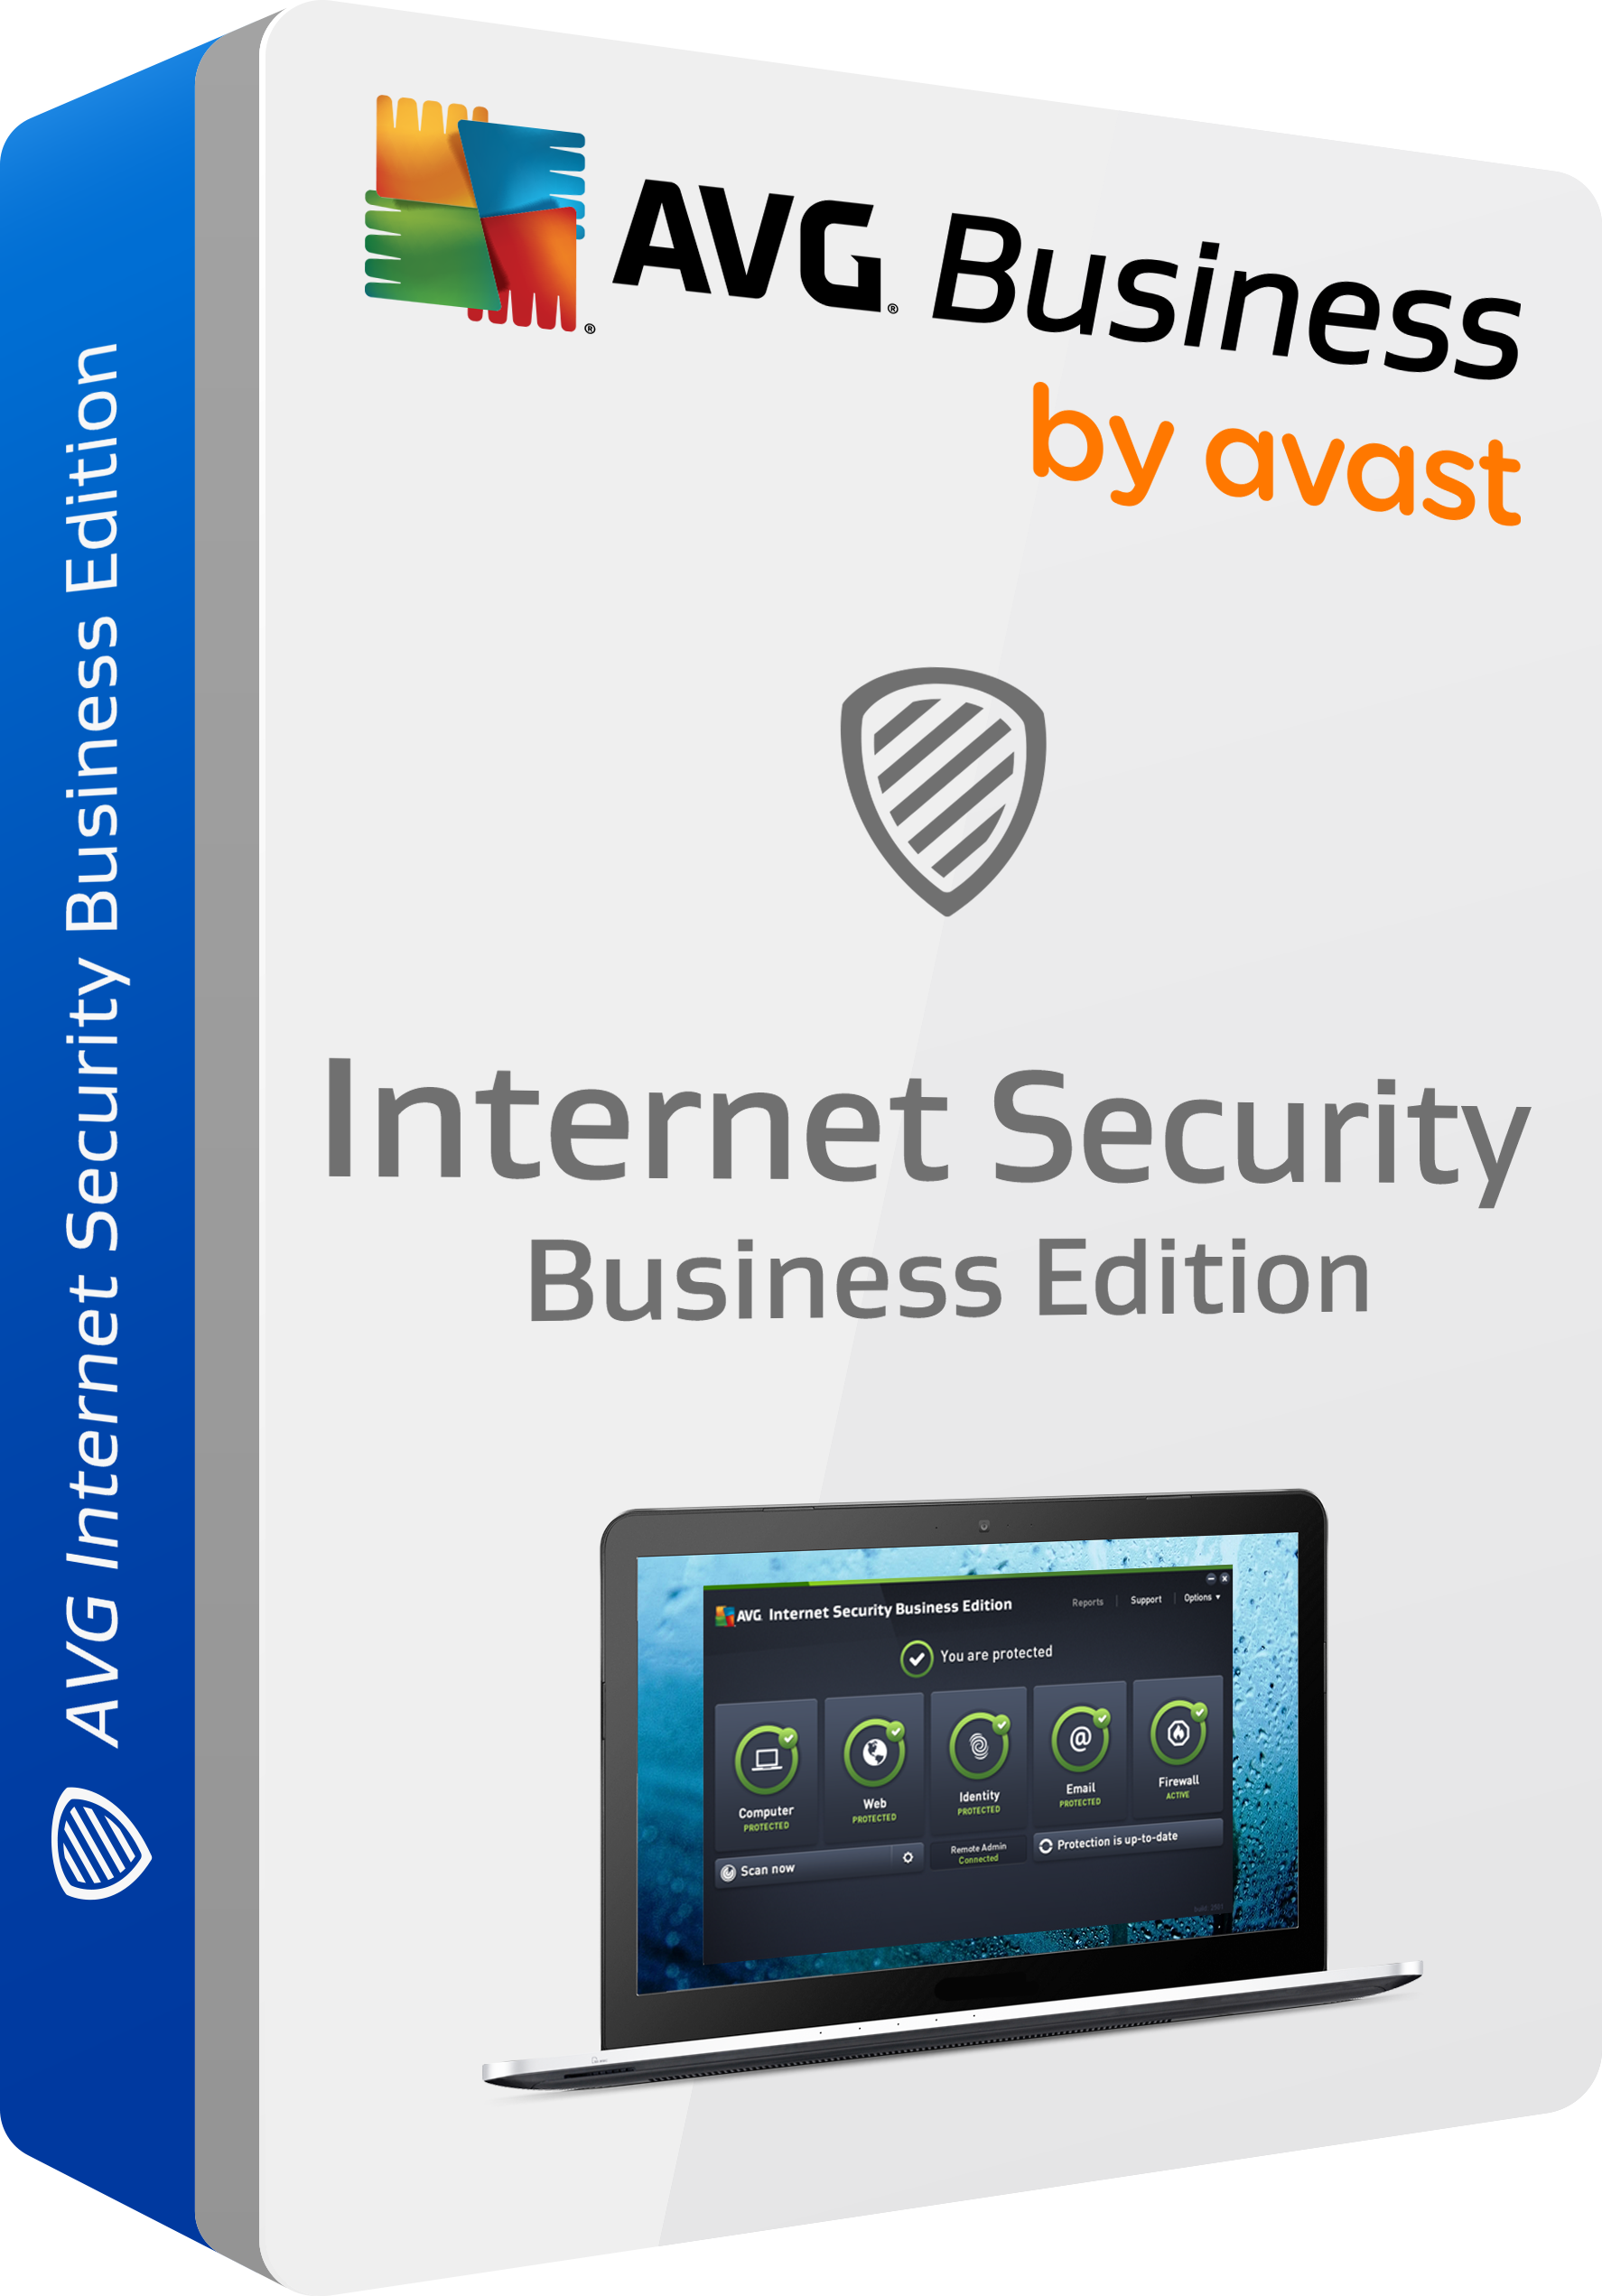 AVG Internet Security Business Edition, 3 Years License